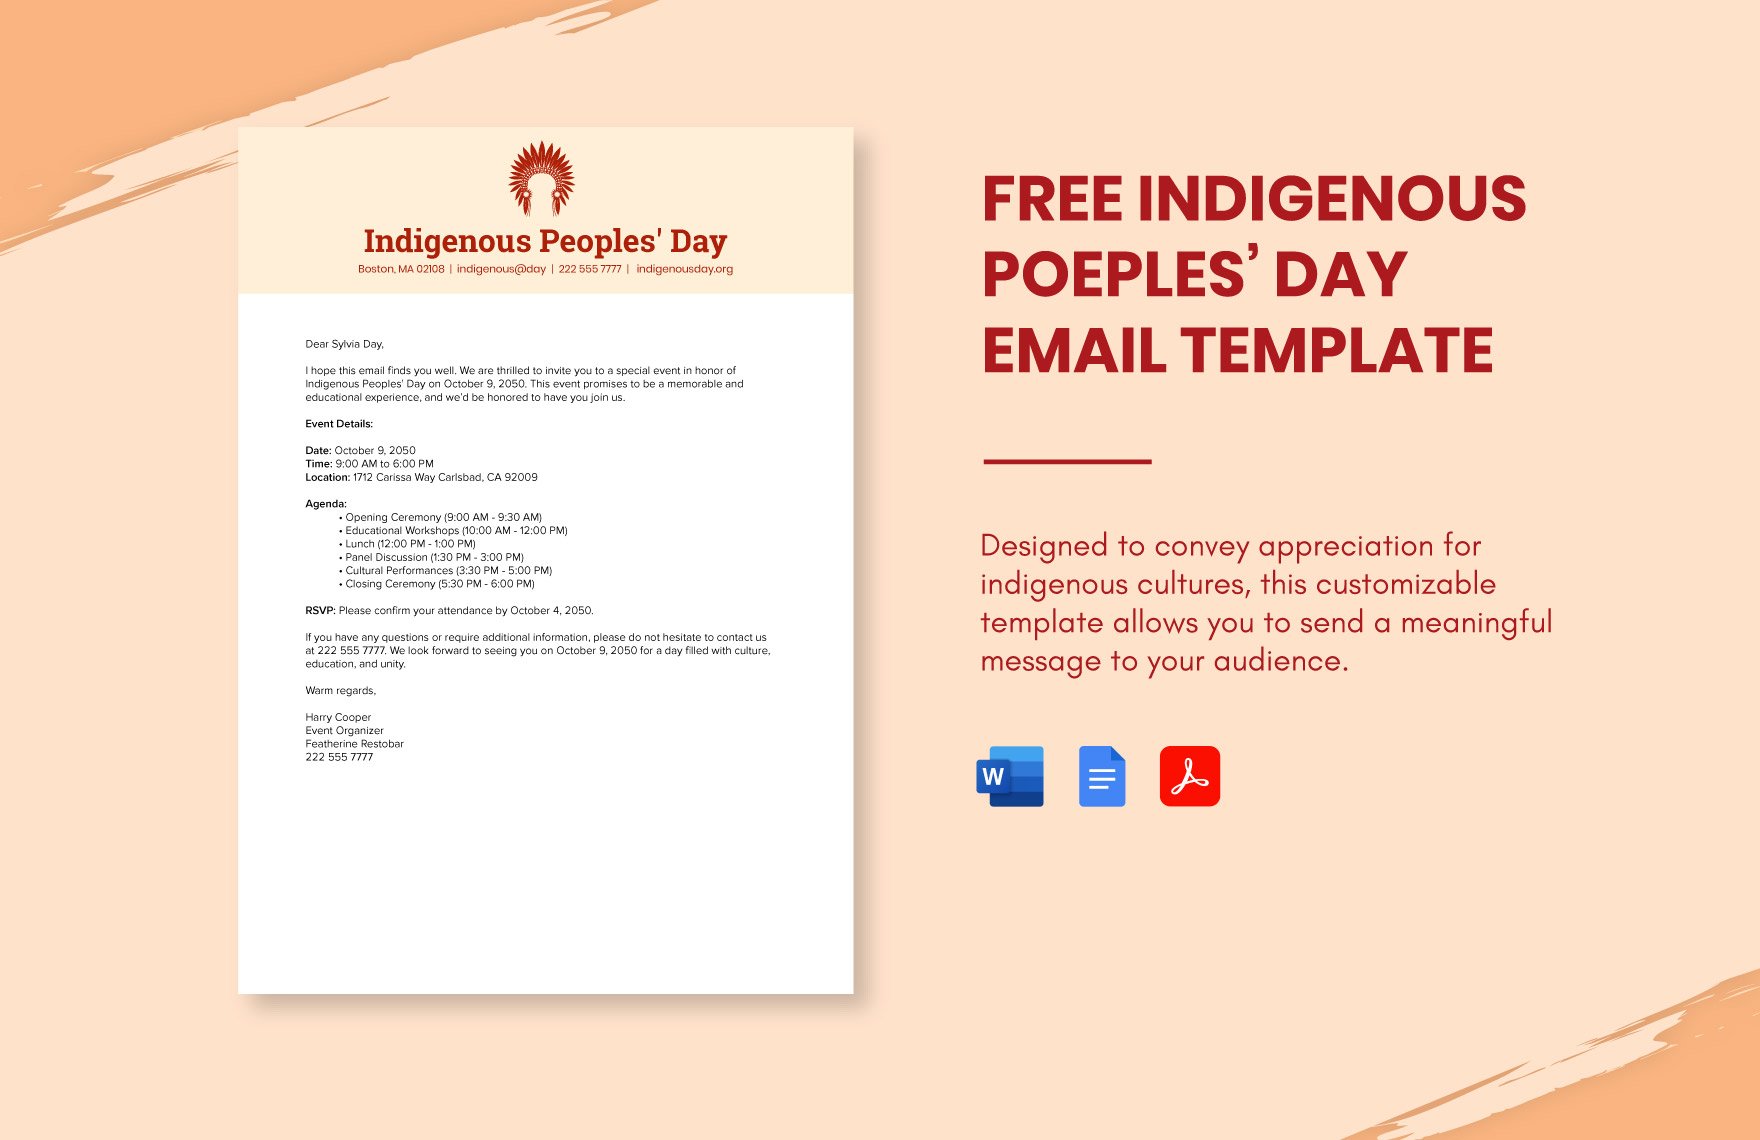 Free Indigenous Peoples' Day Email Template